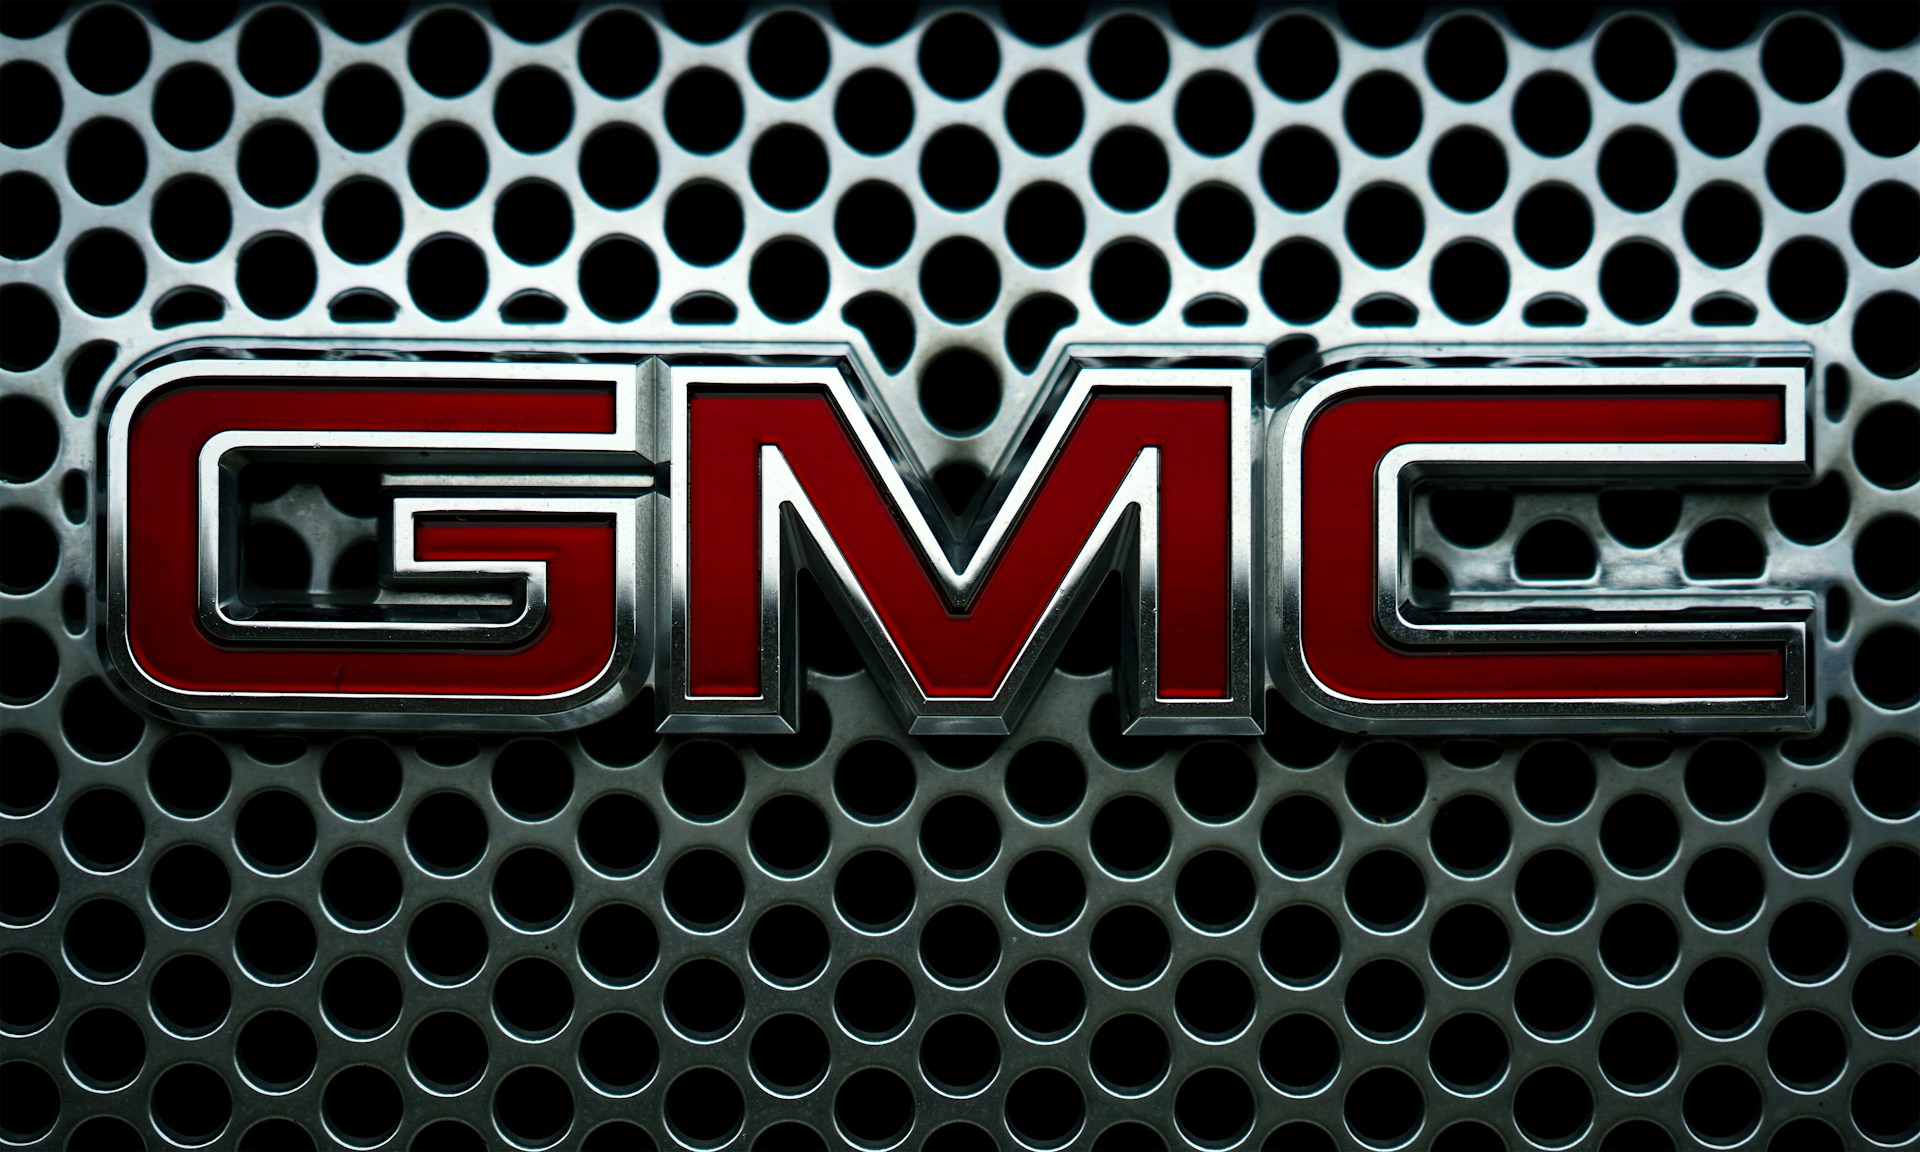 A close-up of the GMC logo on a grille with holes.